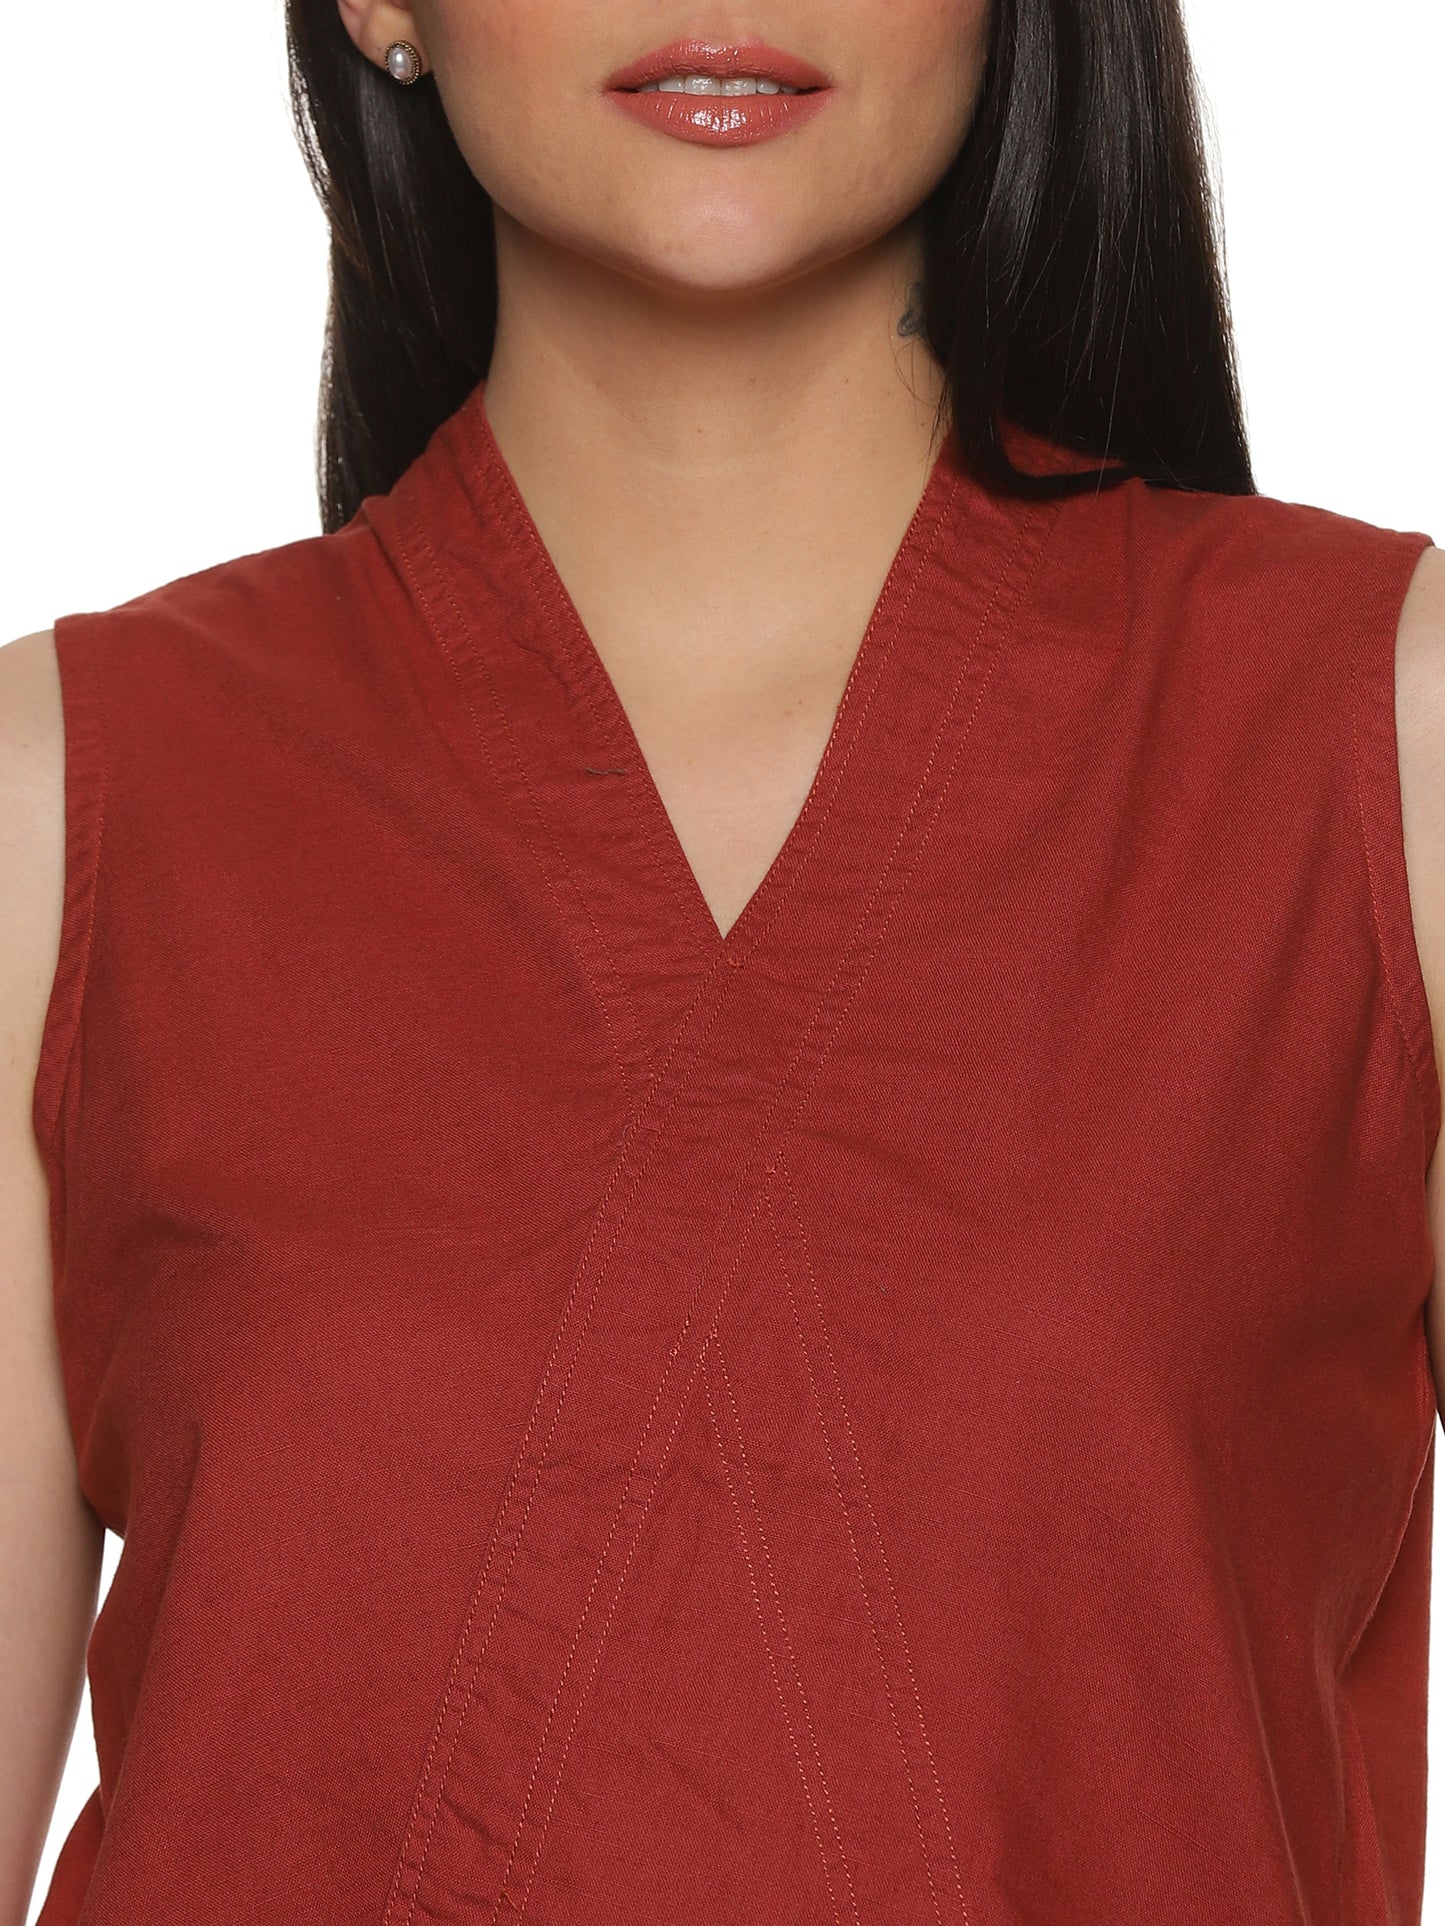 A zoomed in view of lady in Linen Cotton Sleeveless Top - Rust Orange, womens workwear 